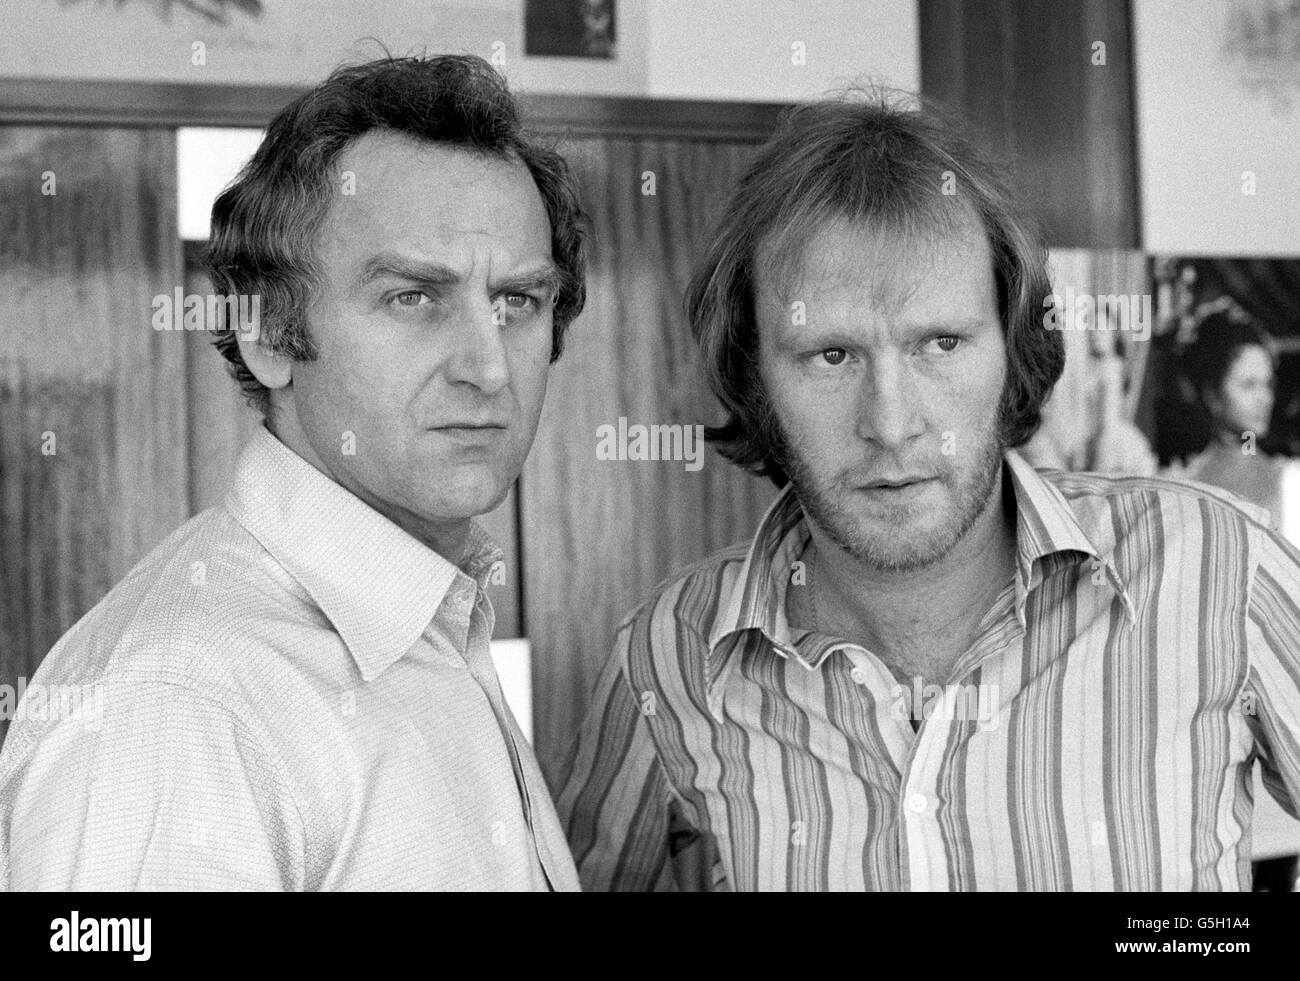 THE SWEENEY 1974: Giving a preview of Thames TV's new series - The Sweeney - are John Thaw (left) and Dennis Waterman who play Det. Inspector Jack Regan and his partner, Det. Sergeant George Carter. The 13 week series is based on the work of the elite band of Metropolitan policemen. 21/02/02: John Thaw (left) and co-star Dennis Waterman in the Thames TV's series - The Sweeney - who play Det. Inspector Jack Regan (Thaw) and his partner, Det. Sergeant George Carter.: Actor John Thaw, 60, star of Inspector Morse and The Sweeney, died at home this afternoon his family said. Stock Photo